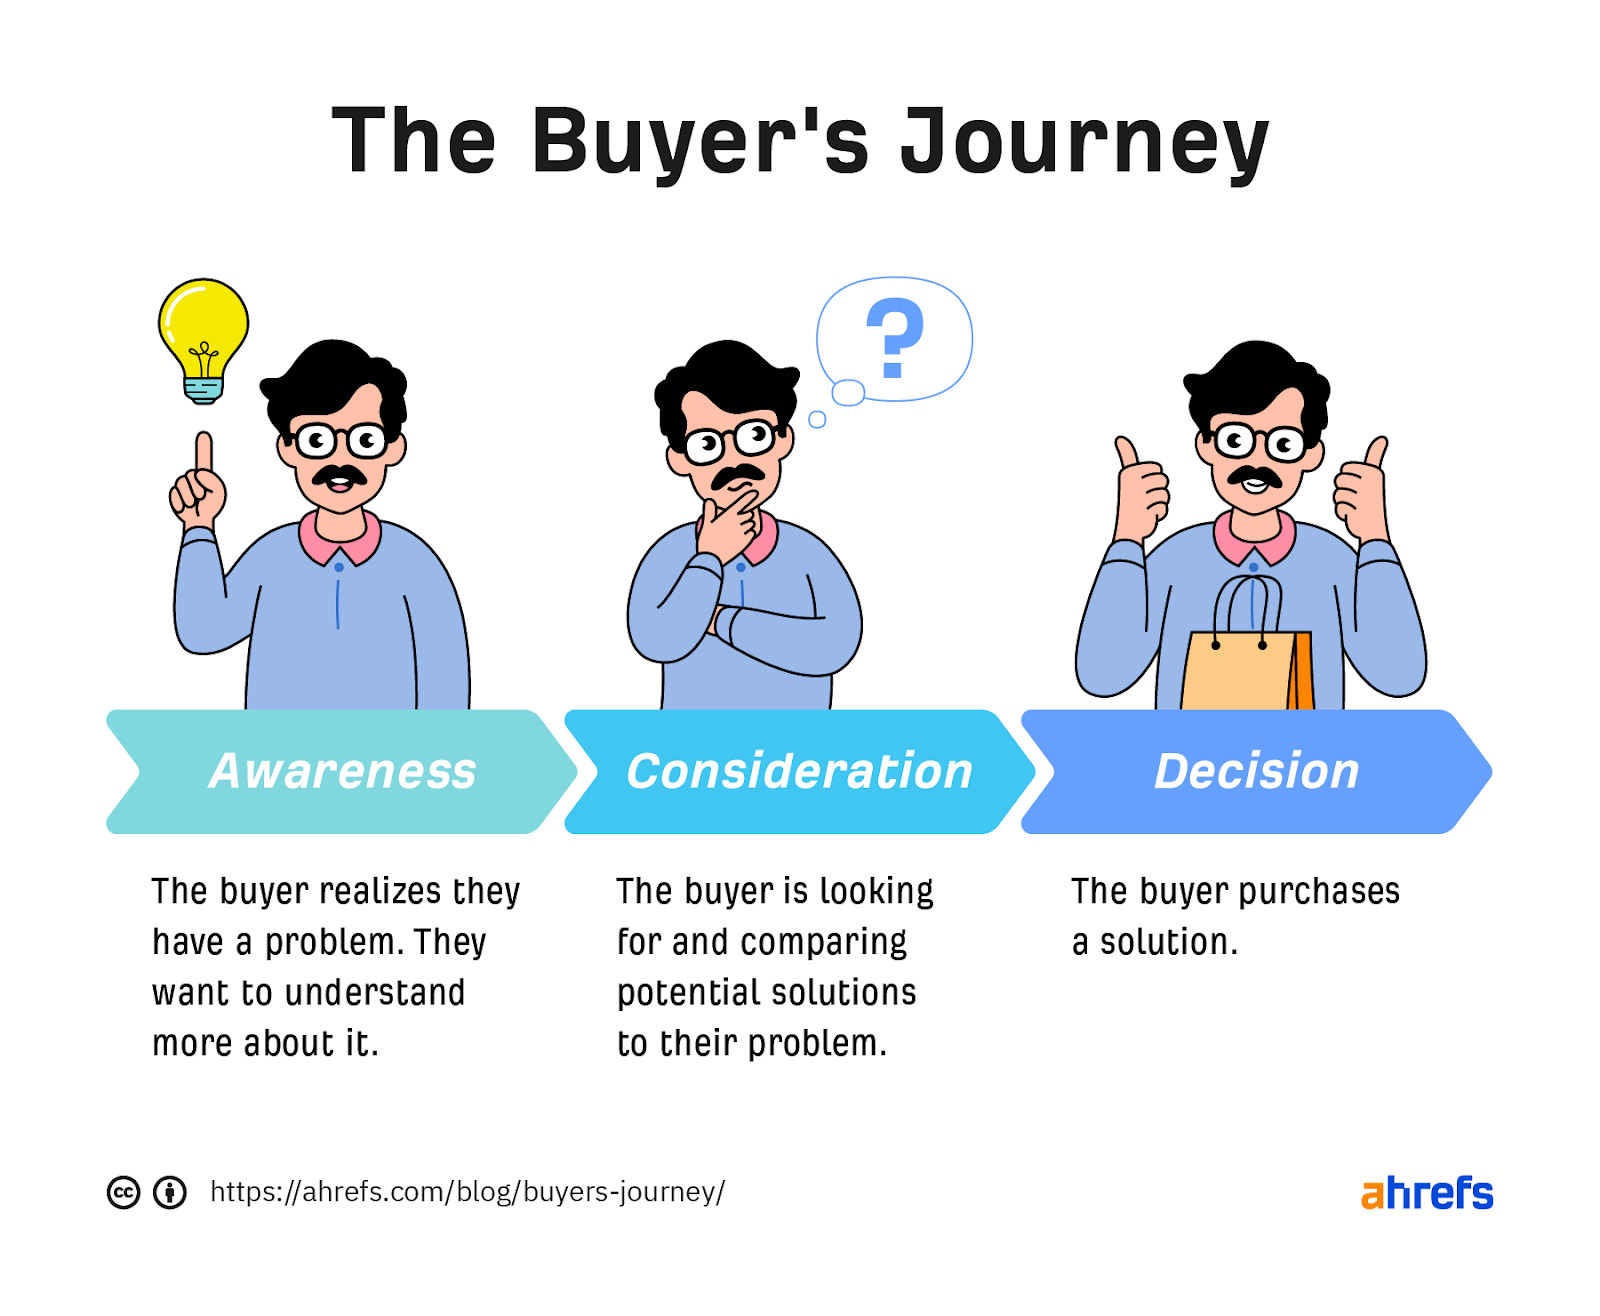 Infographic of 3 stages of buyer's journey: awareness, consideration, and decision  